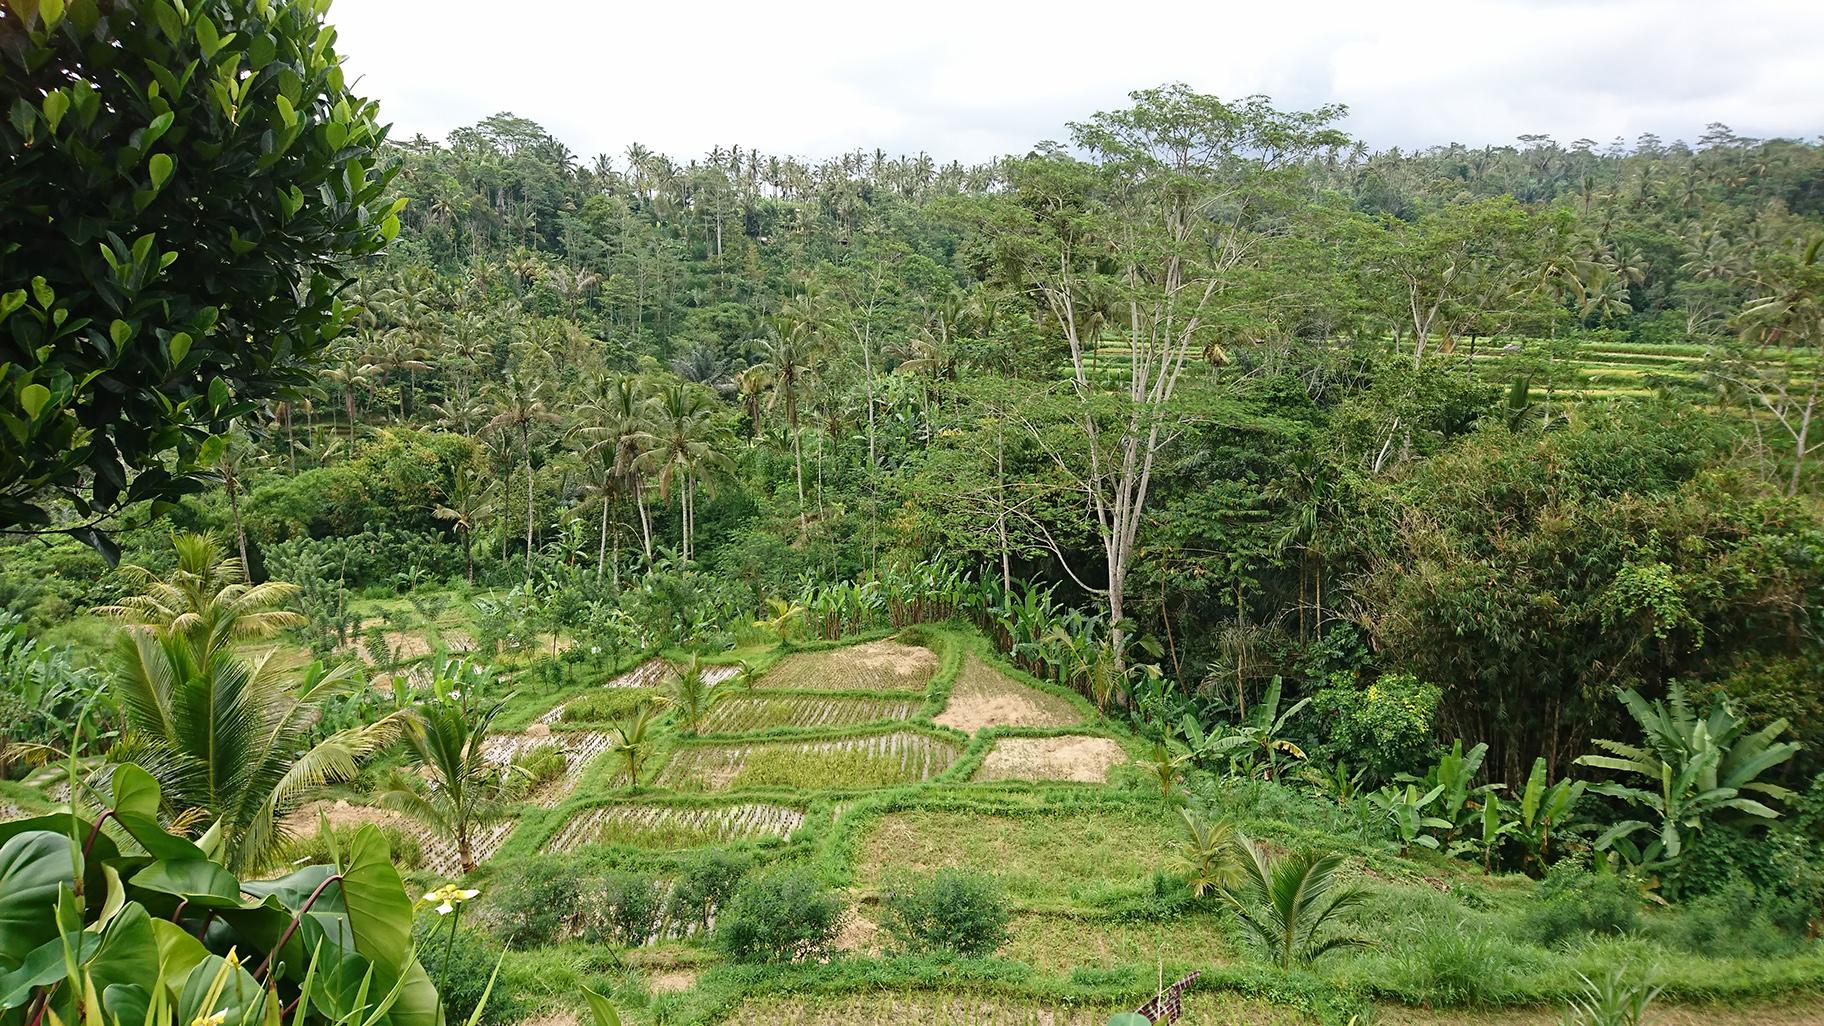 An image of rice fields in Ubud, Bali, submitted as part of the study by an archaeologist from the Max Planck Institute for the Science of Human History. (Lucas Stephens / University of Pennsylvania) 